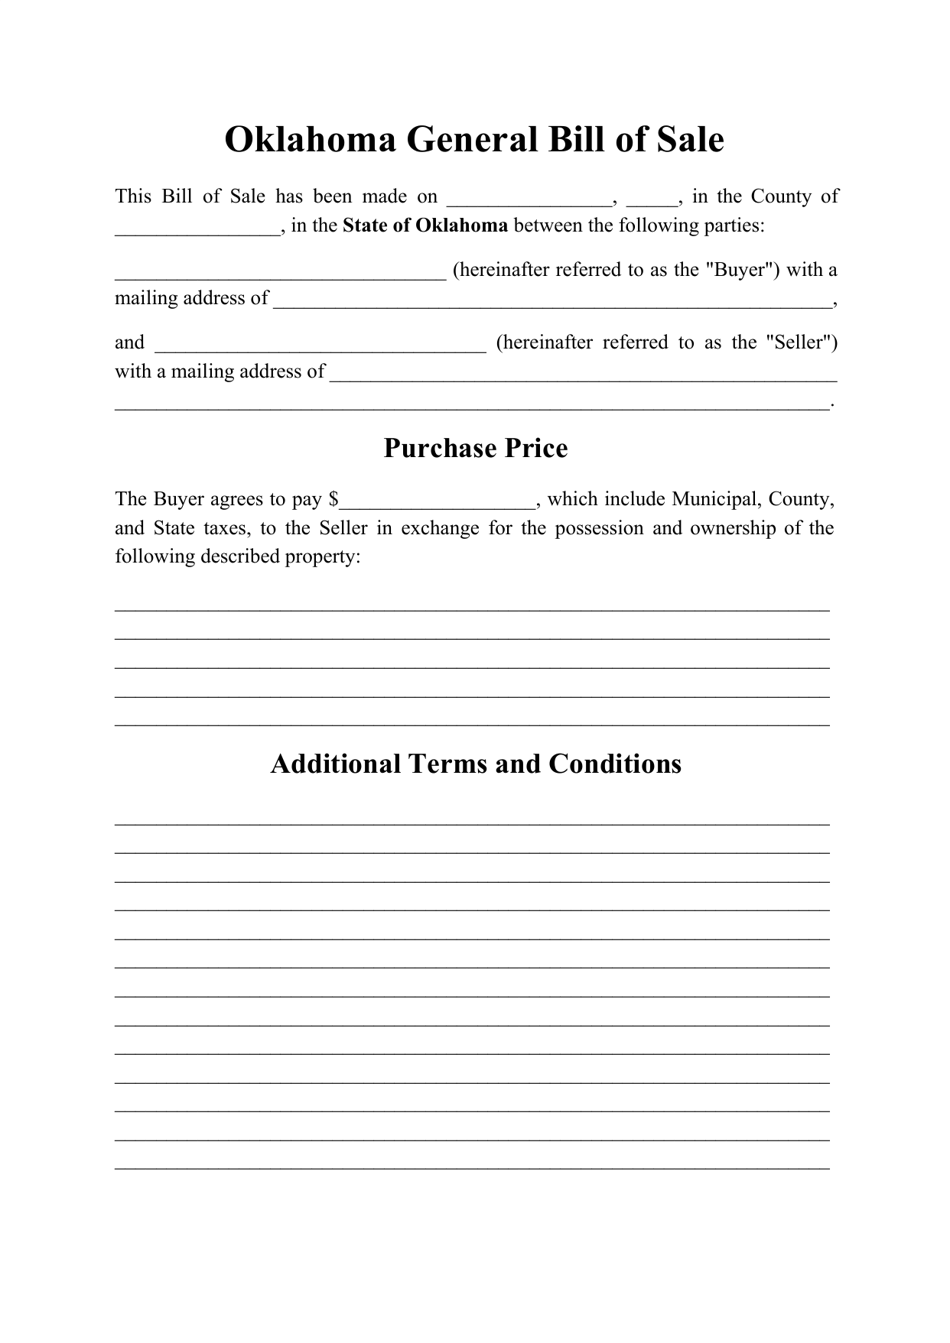 oklahoma-generic-bill-of-sale-form-download-printable-pdf-templateroller